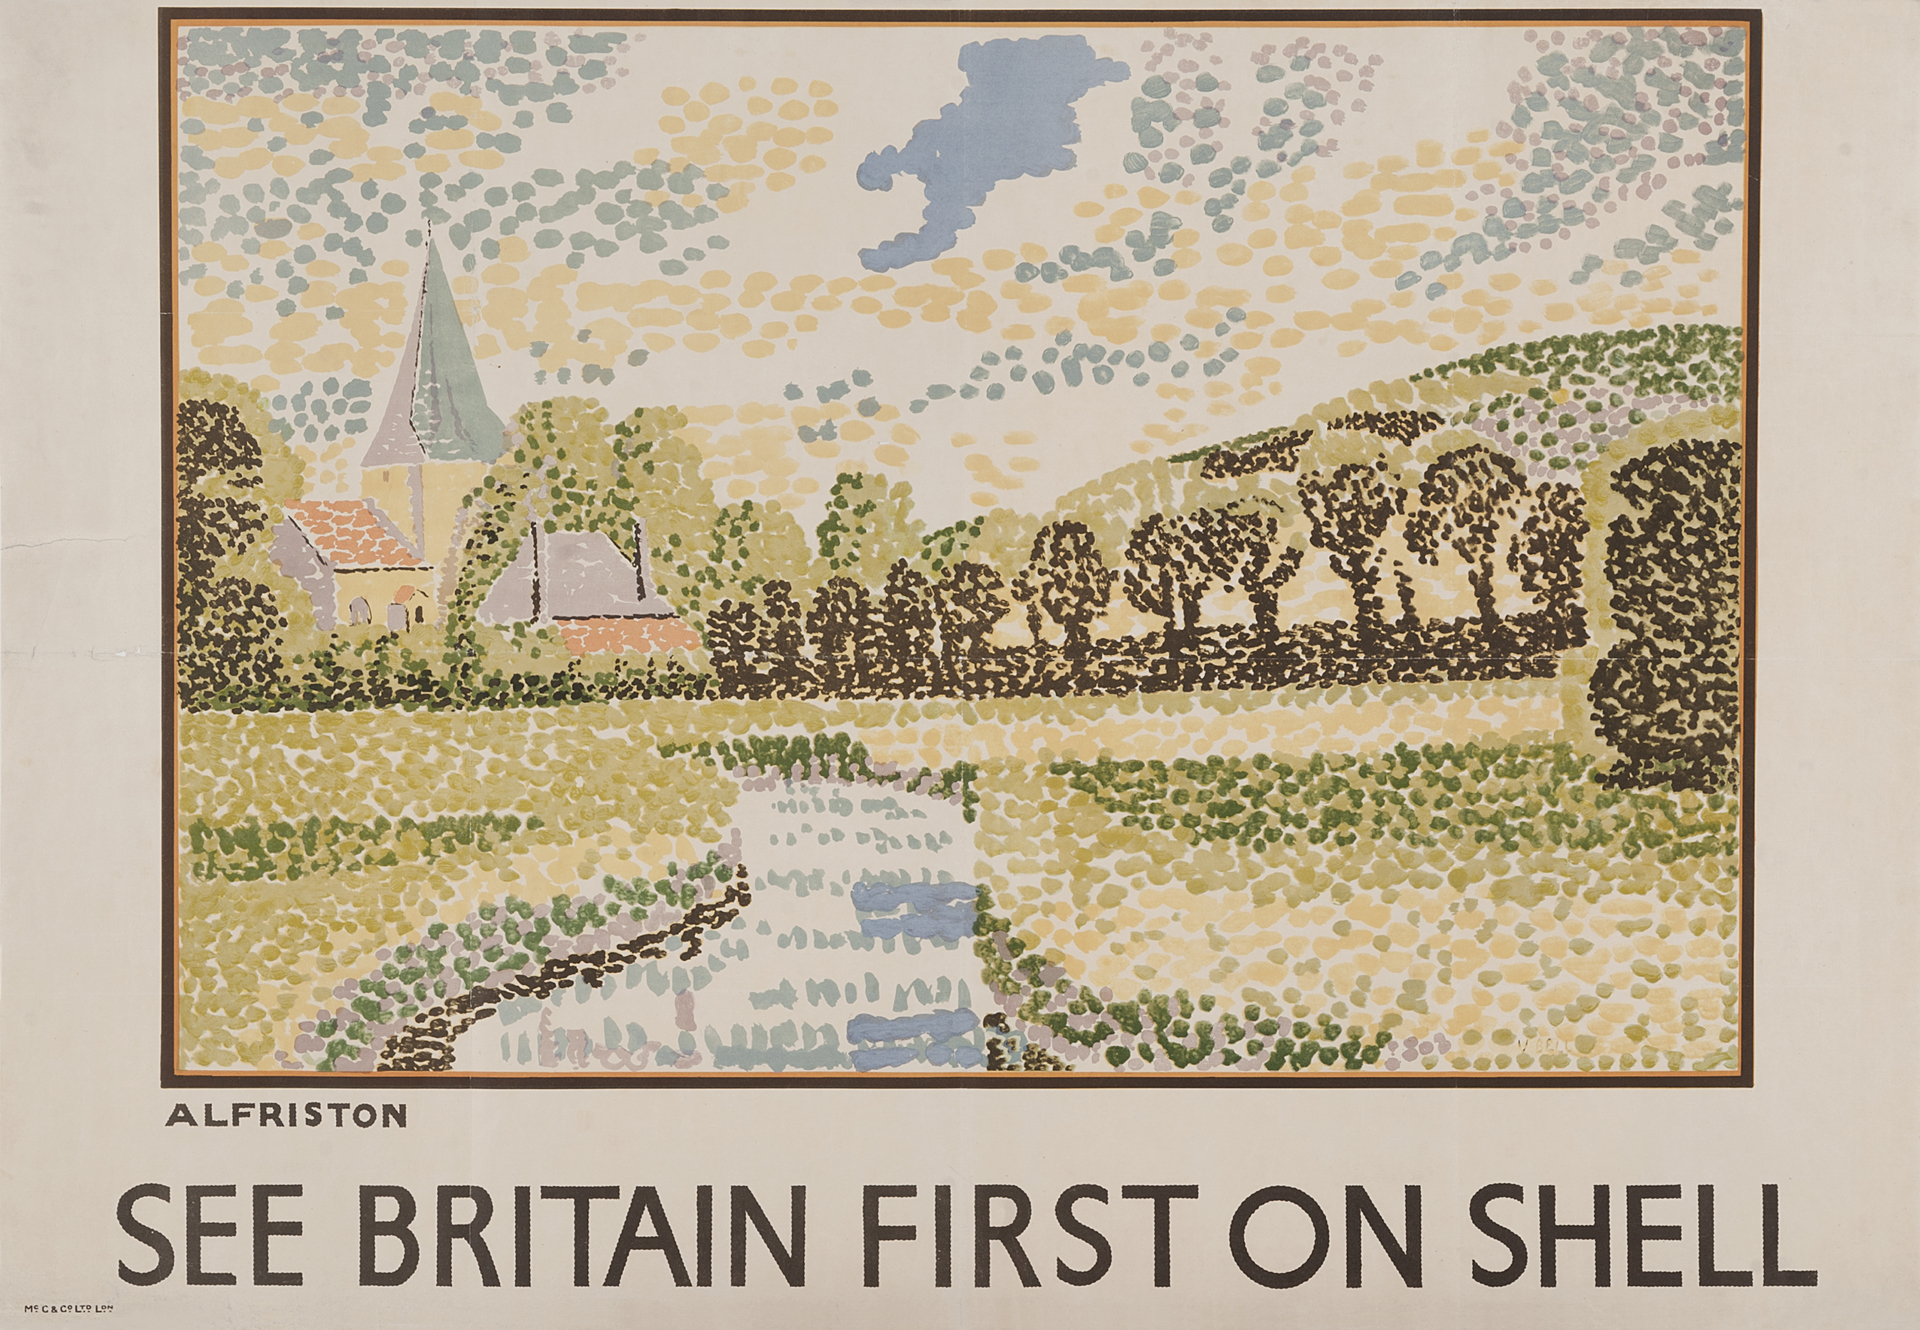 Poster of Alfriston by Vanessa Bell, 1931